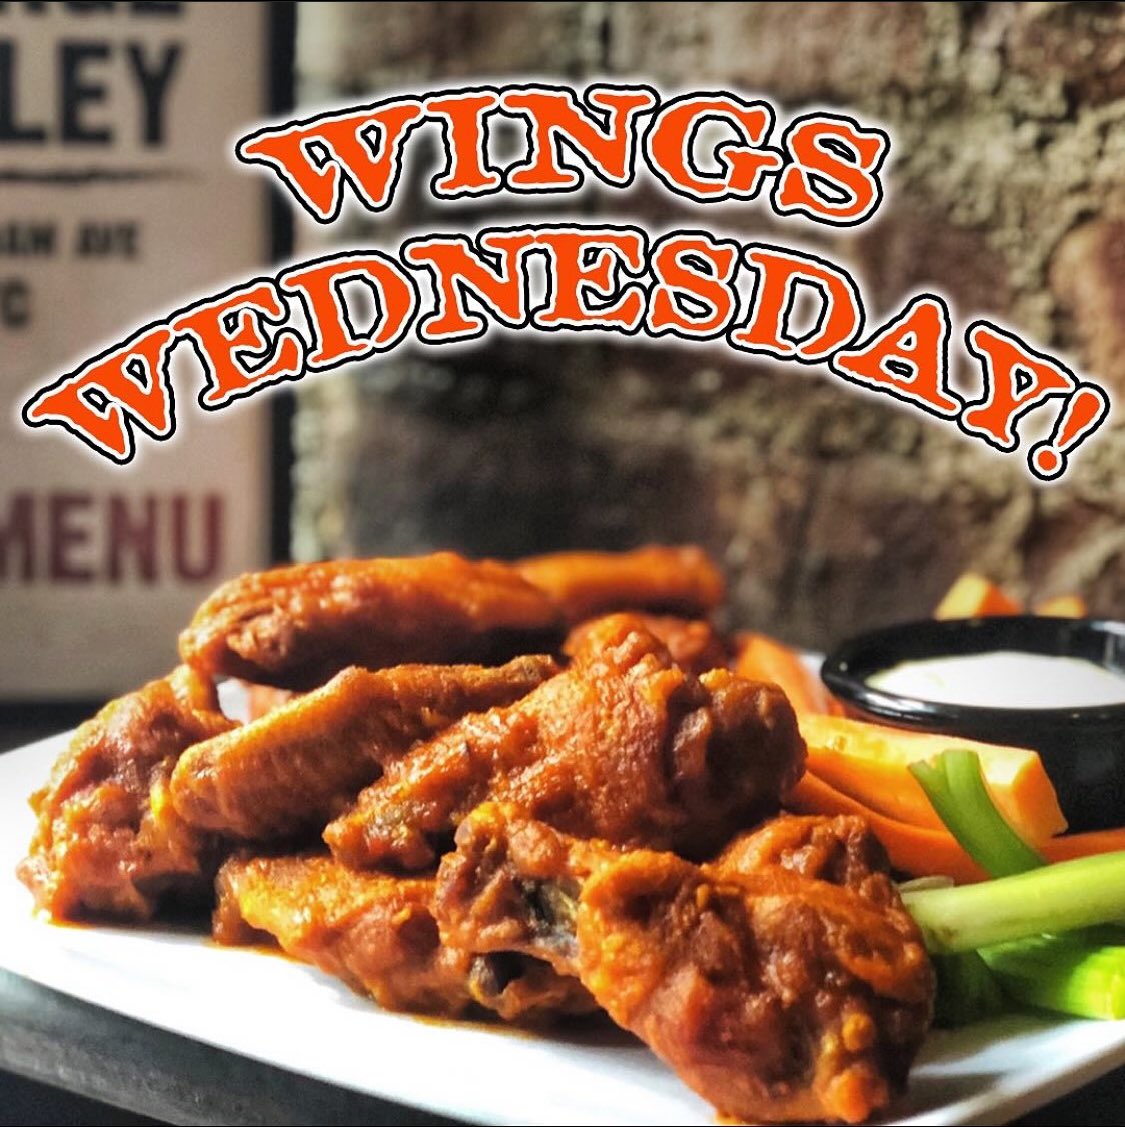 It's #WINGSWEDNESDAY🔥 come thru and enjoy 20%off  while catching ⚾️ as well as more 🏀 playoffs 🍻 #HumpDay #georgekeeley #gknyc #beerisgood #shutupanddrink #drinkamongstfriends #uwsnyc #upperwestsideeats #cheers #pubgrub #chickenwings #buffalowings #hotwings #wingsonwednesdays